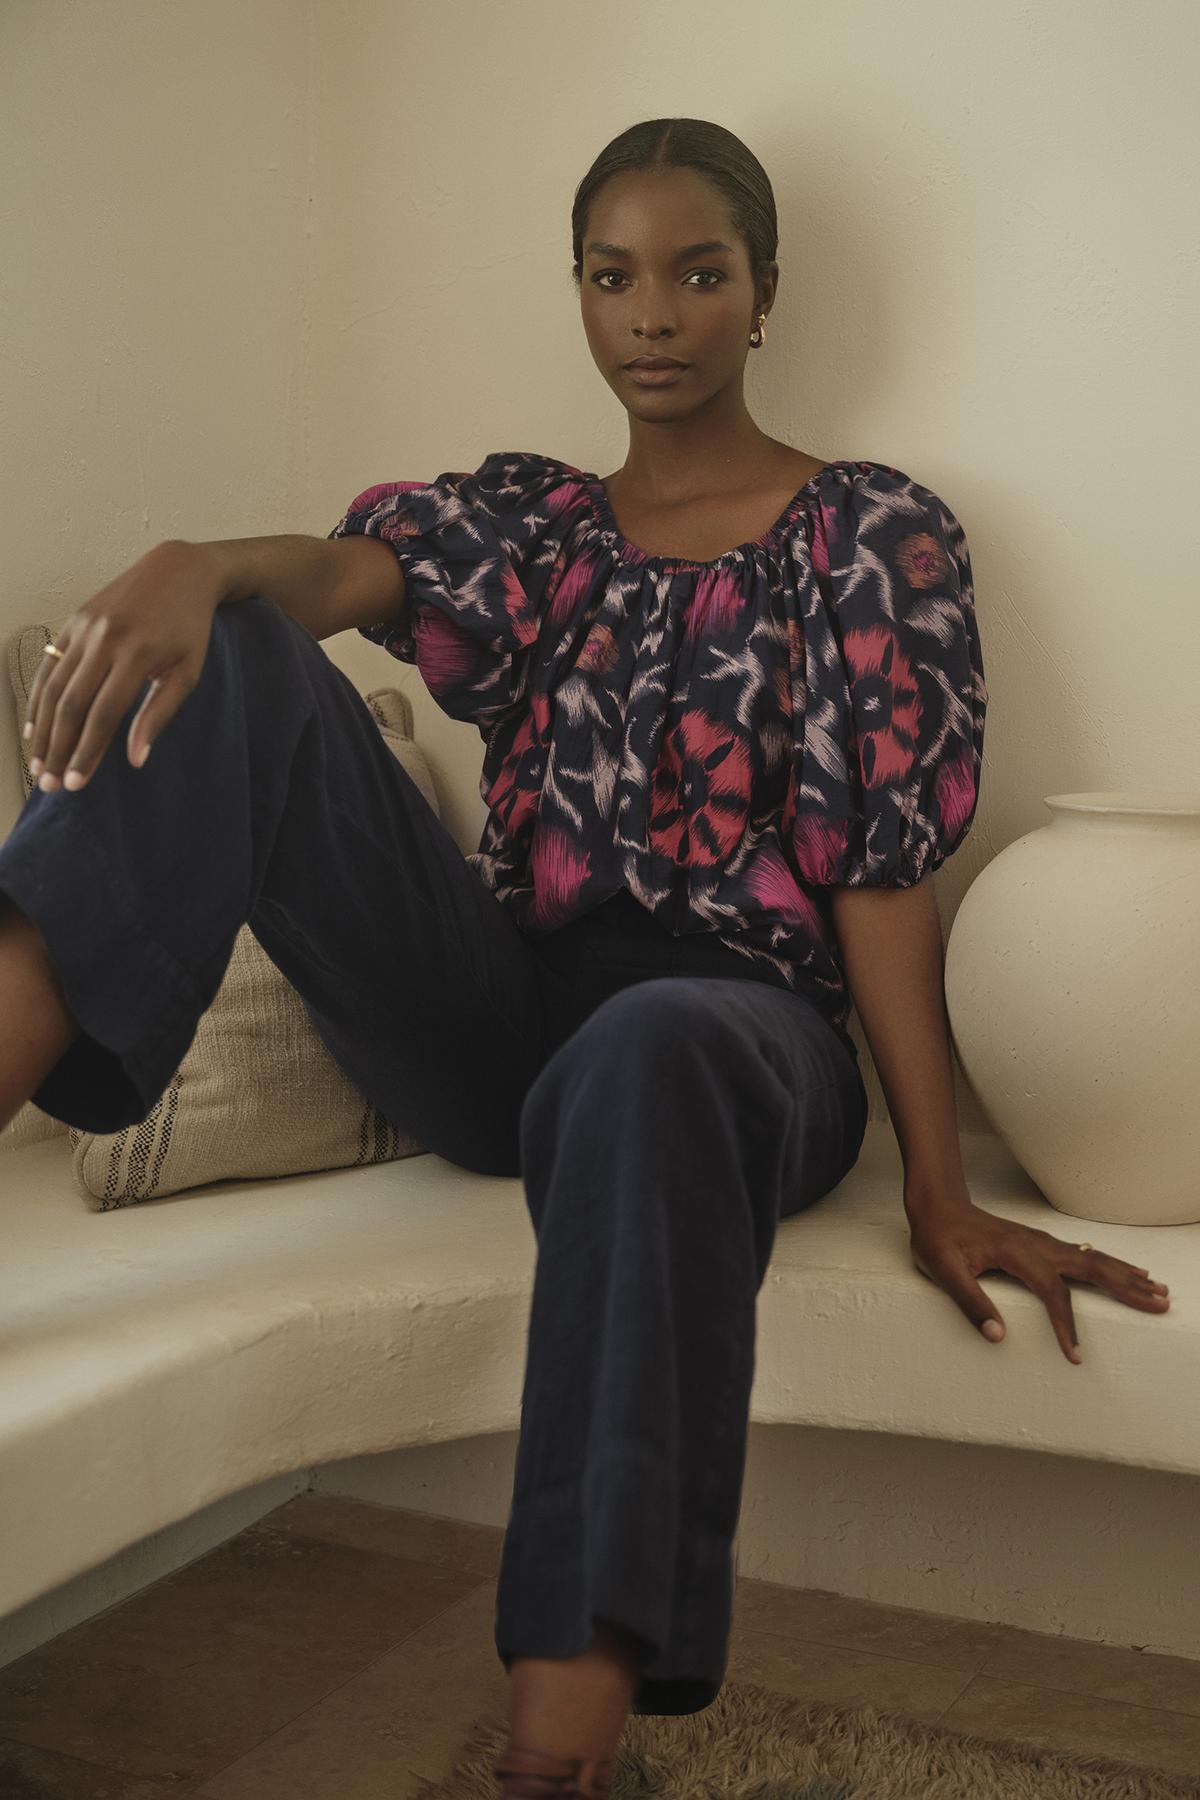 Woman sitting on a bench with a neutral expression, wearing a versatile styling puff-sleeved Velvet by Graham & Spencer EDLIN PRINTED SILK COTTON VOILE top and dark pants.-36320308854977